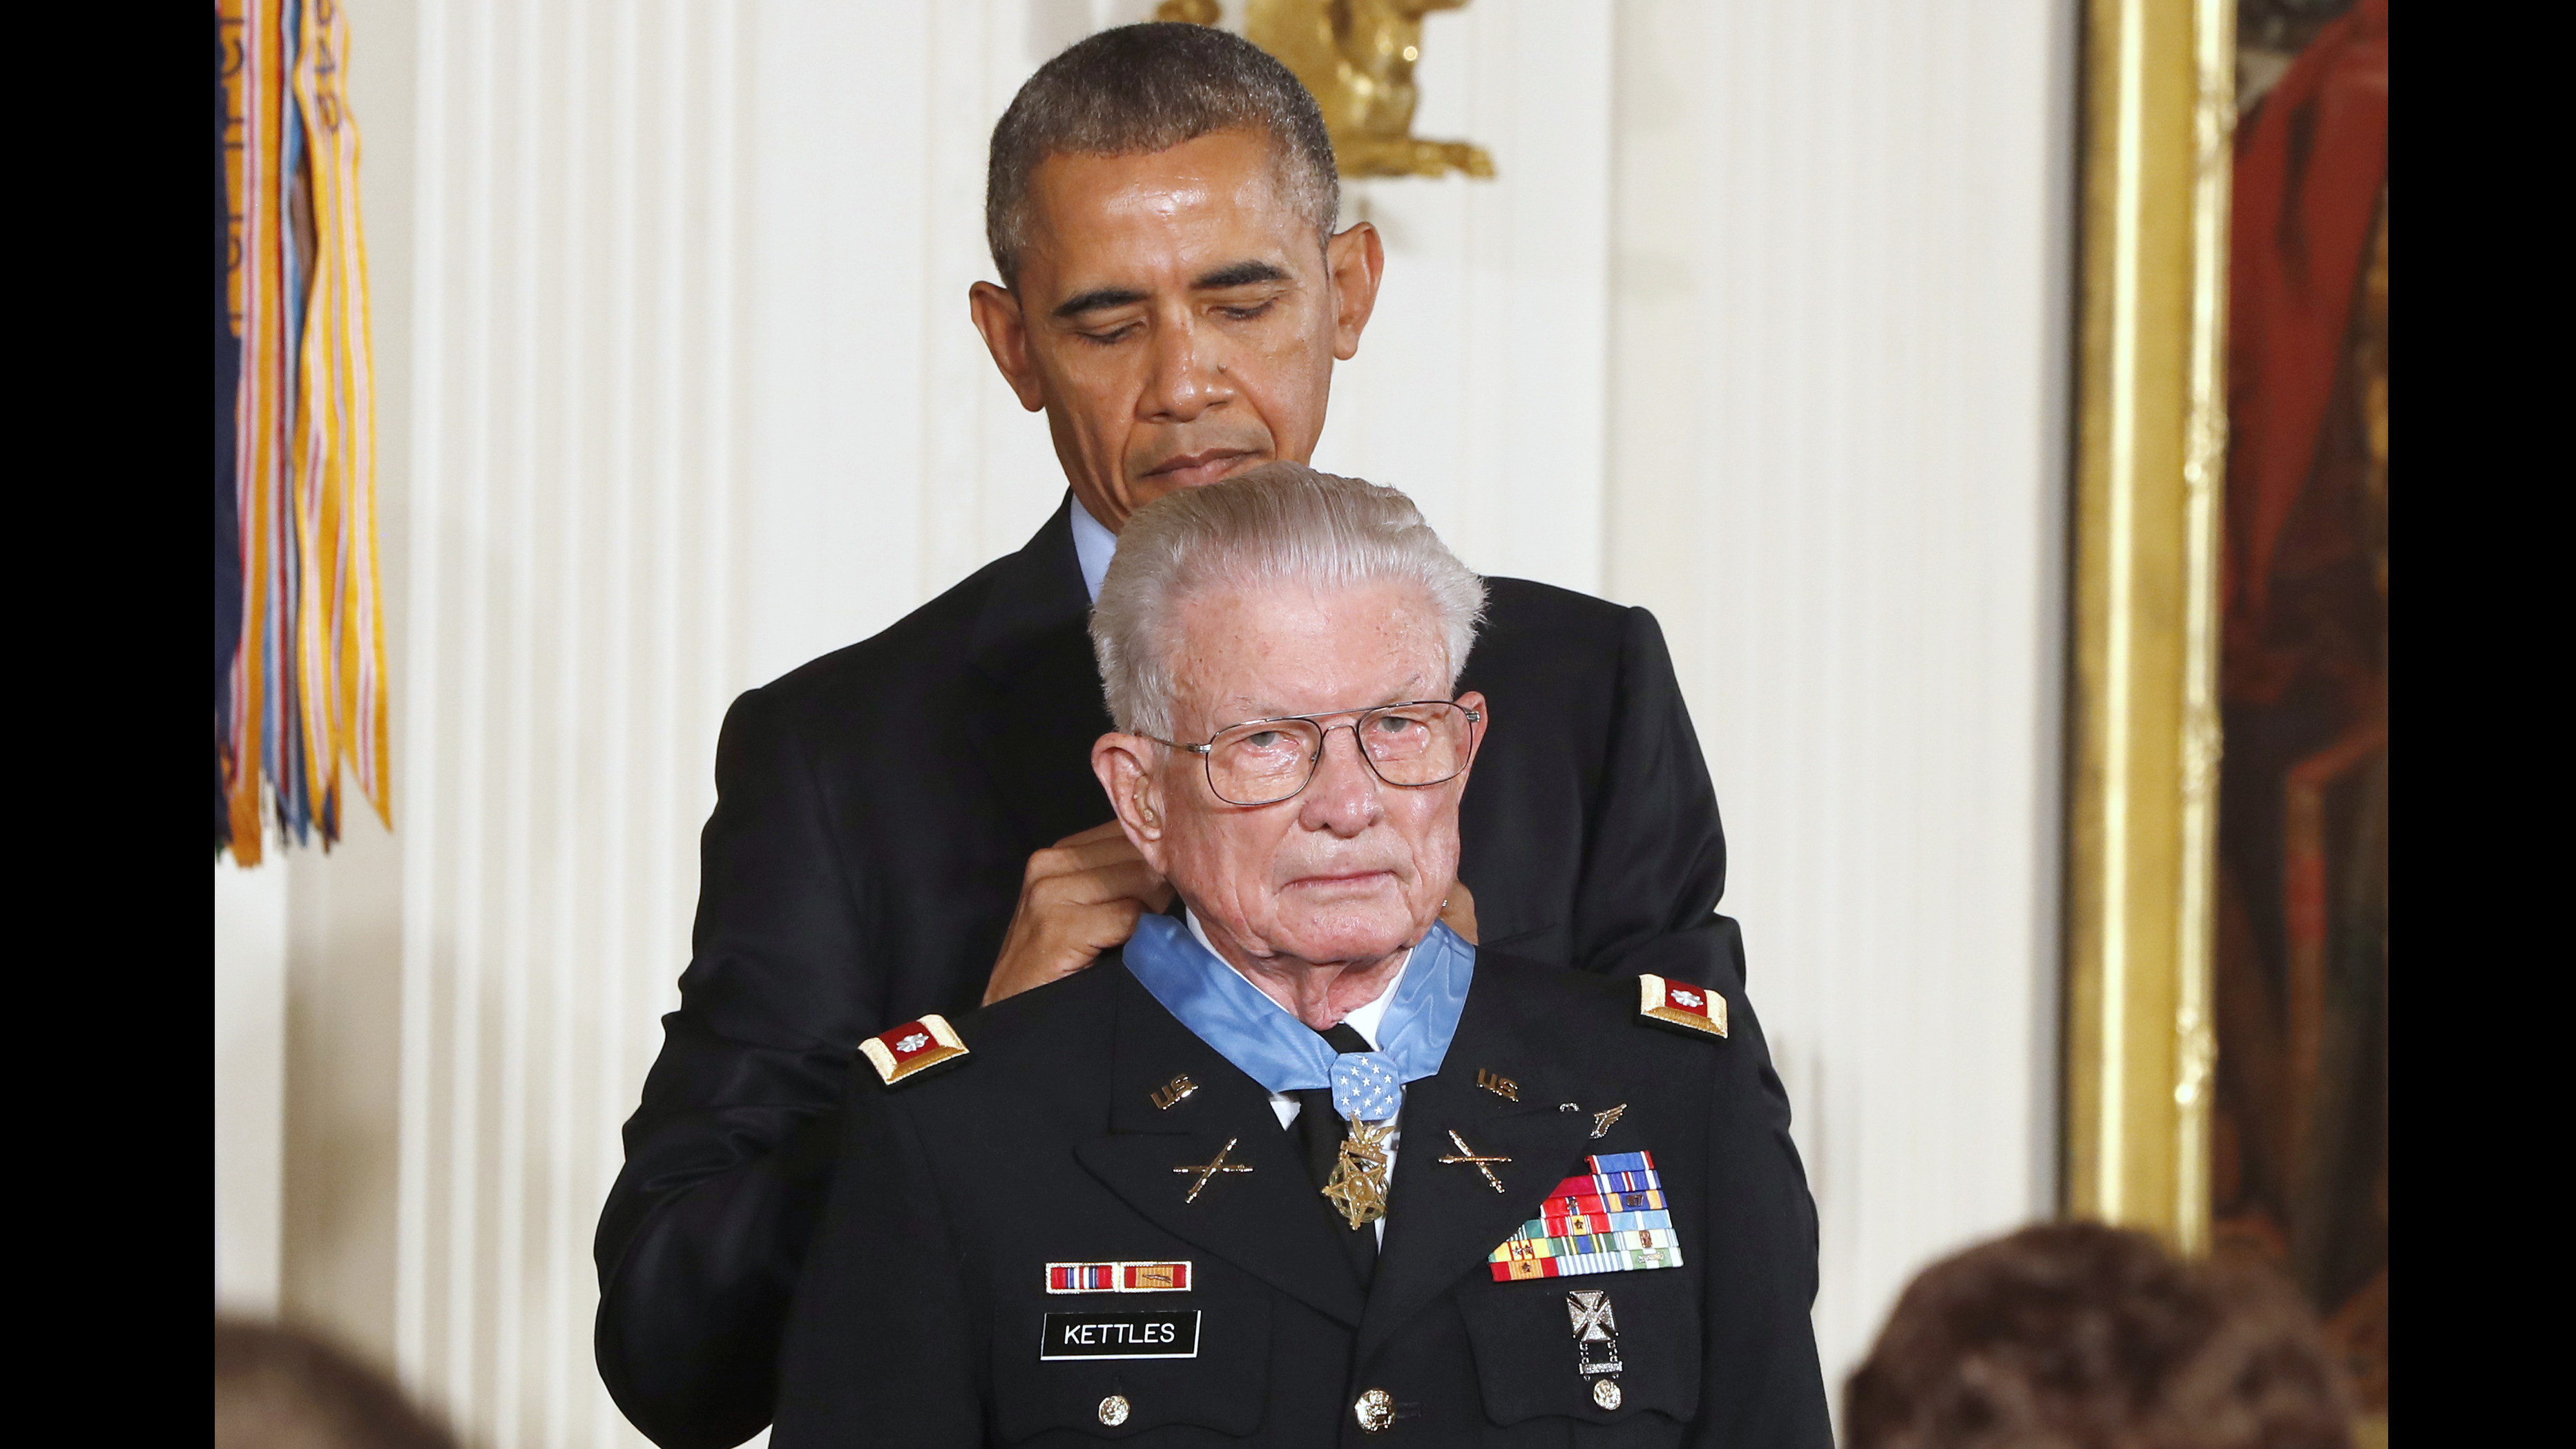 do medal of honor recipients have to get screened